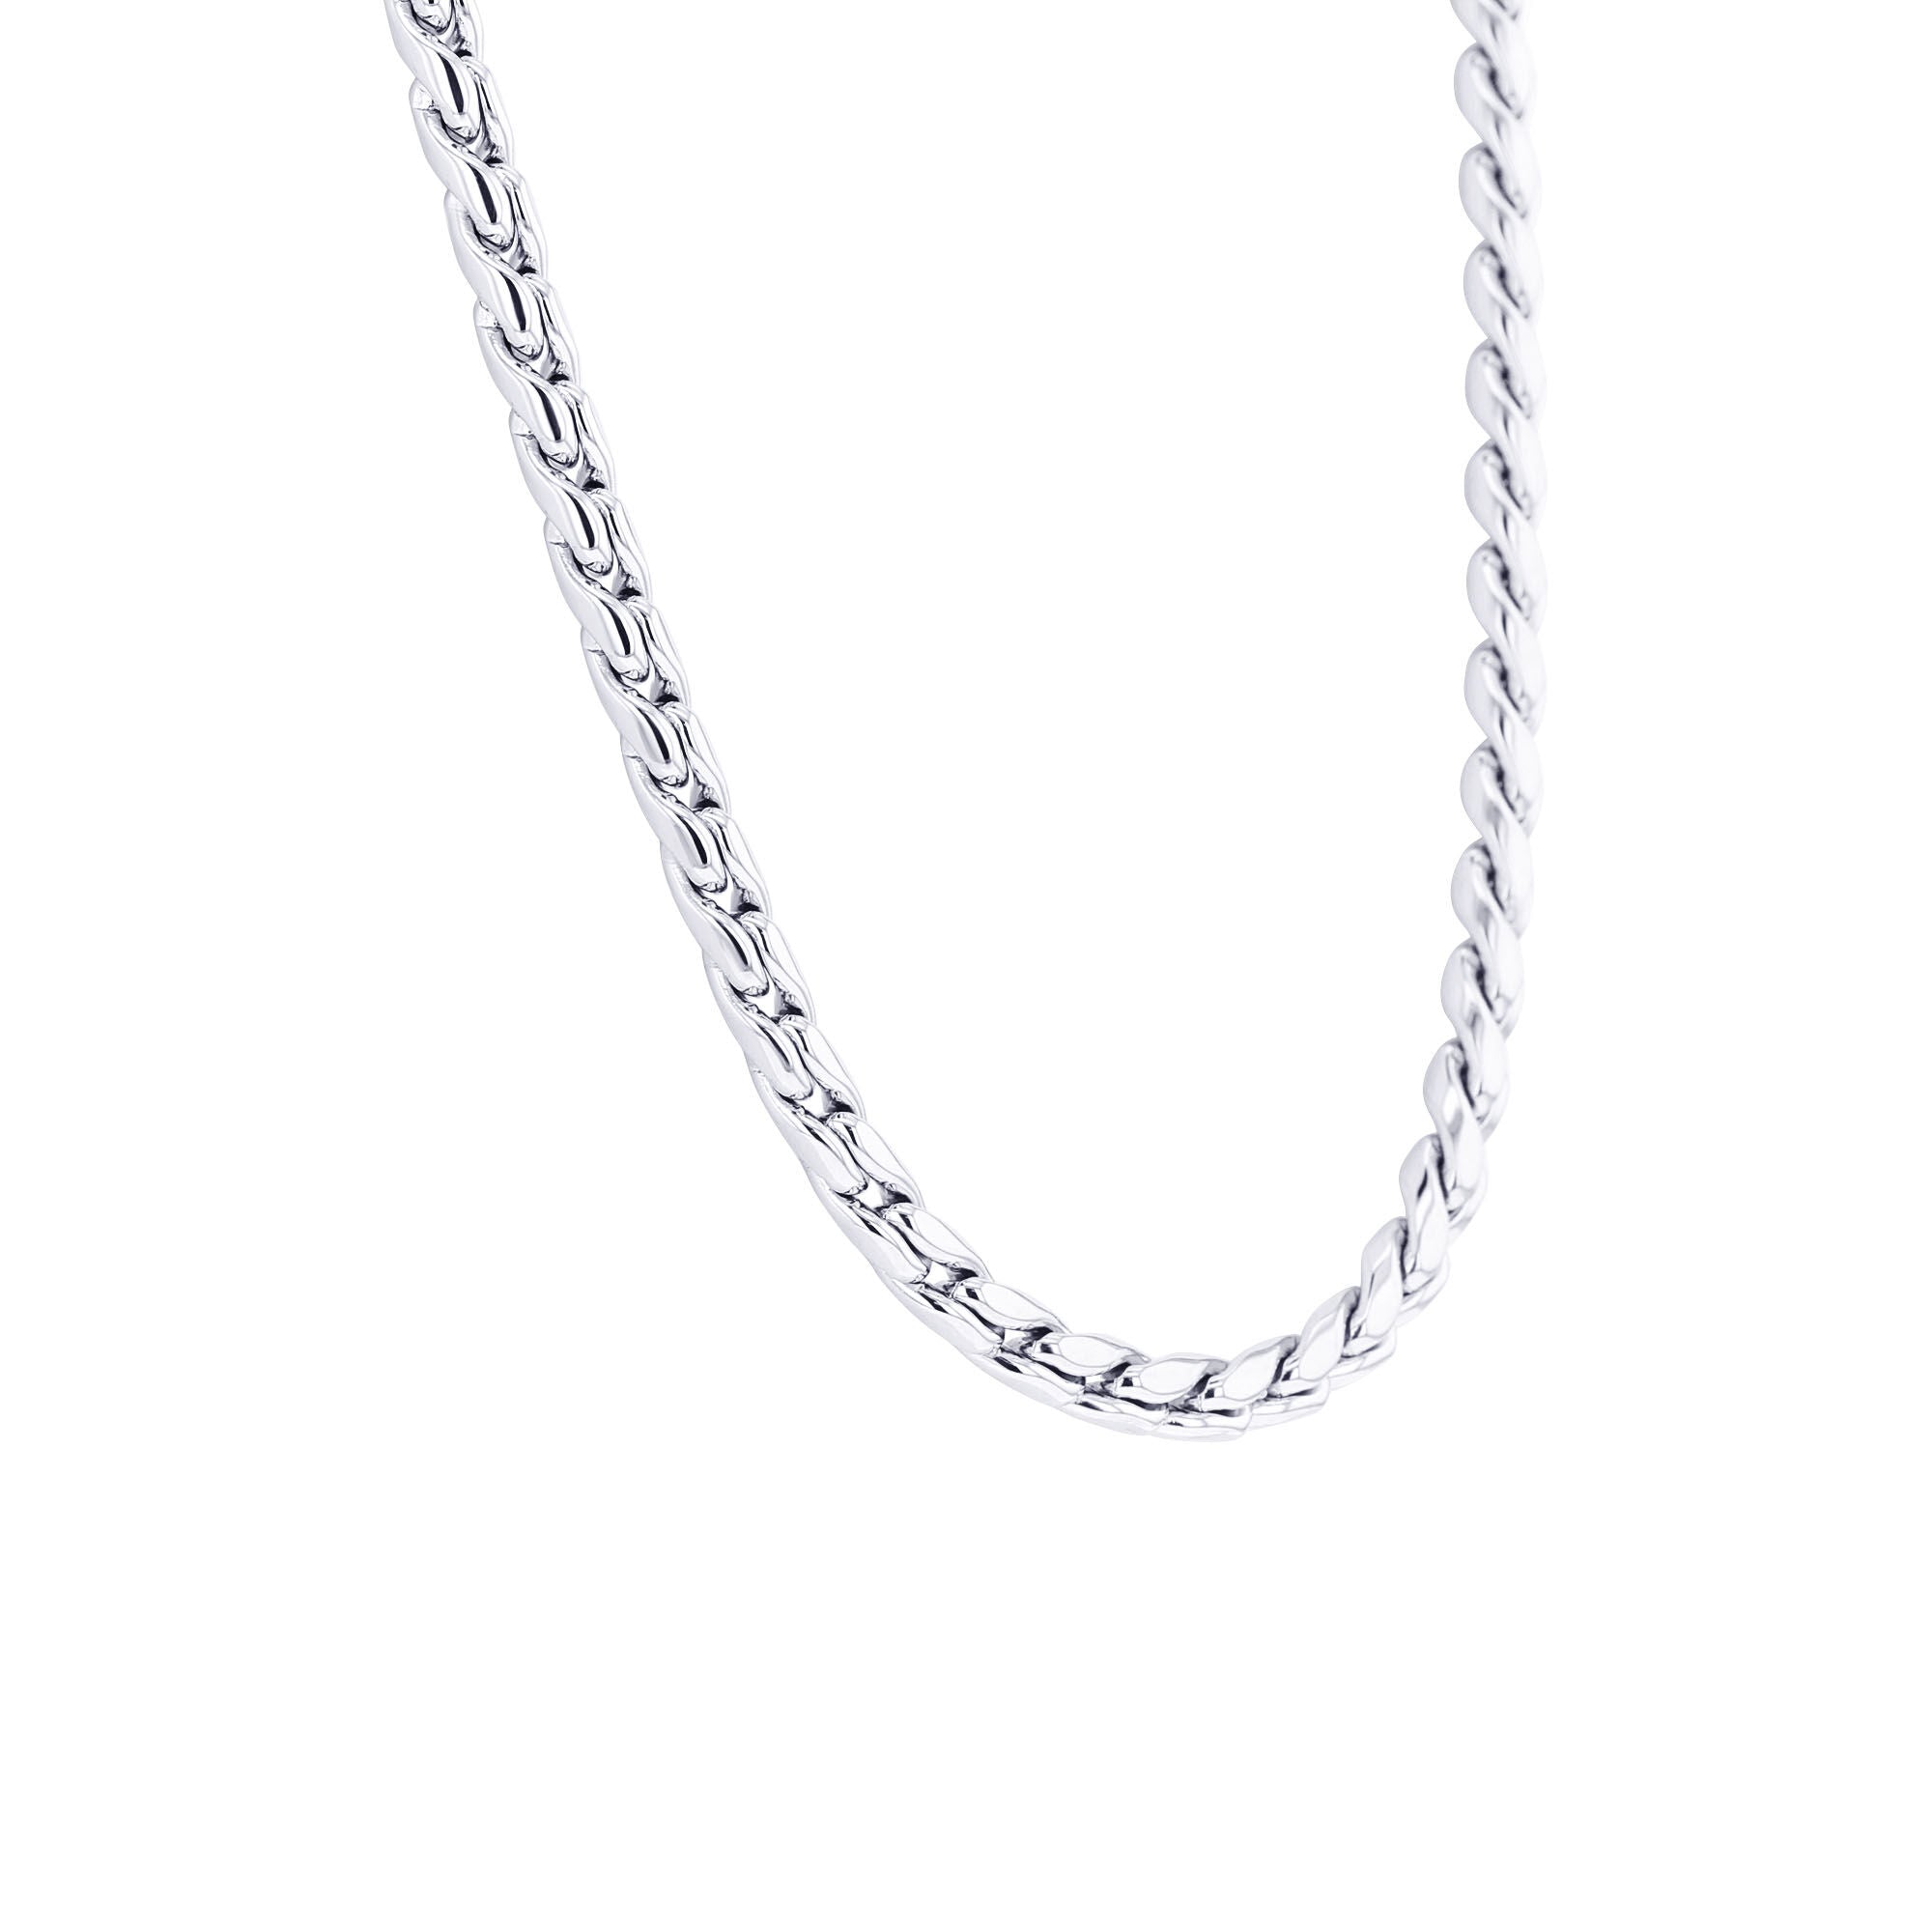 Bronte Stainless Steel "S" Link Necklace